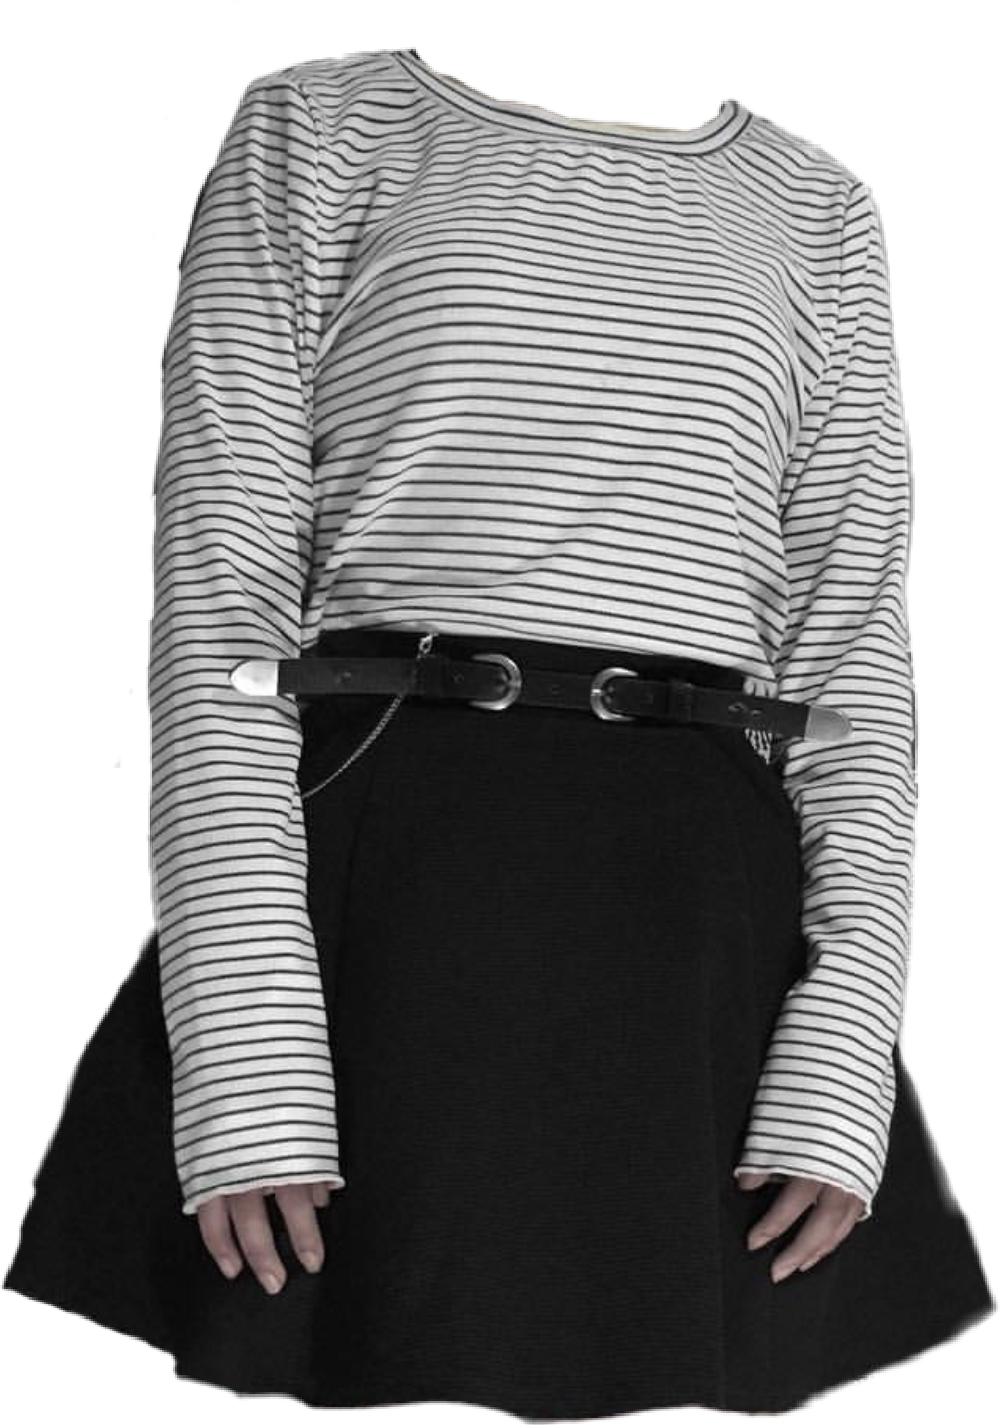 A Woman Wearing A Black Skirt And A Striped Shirt